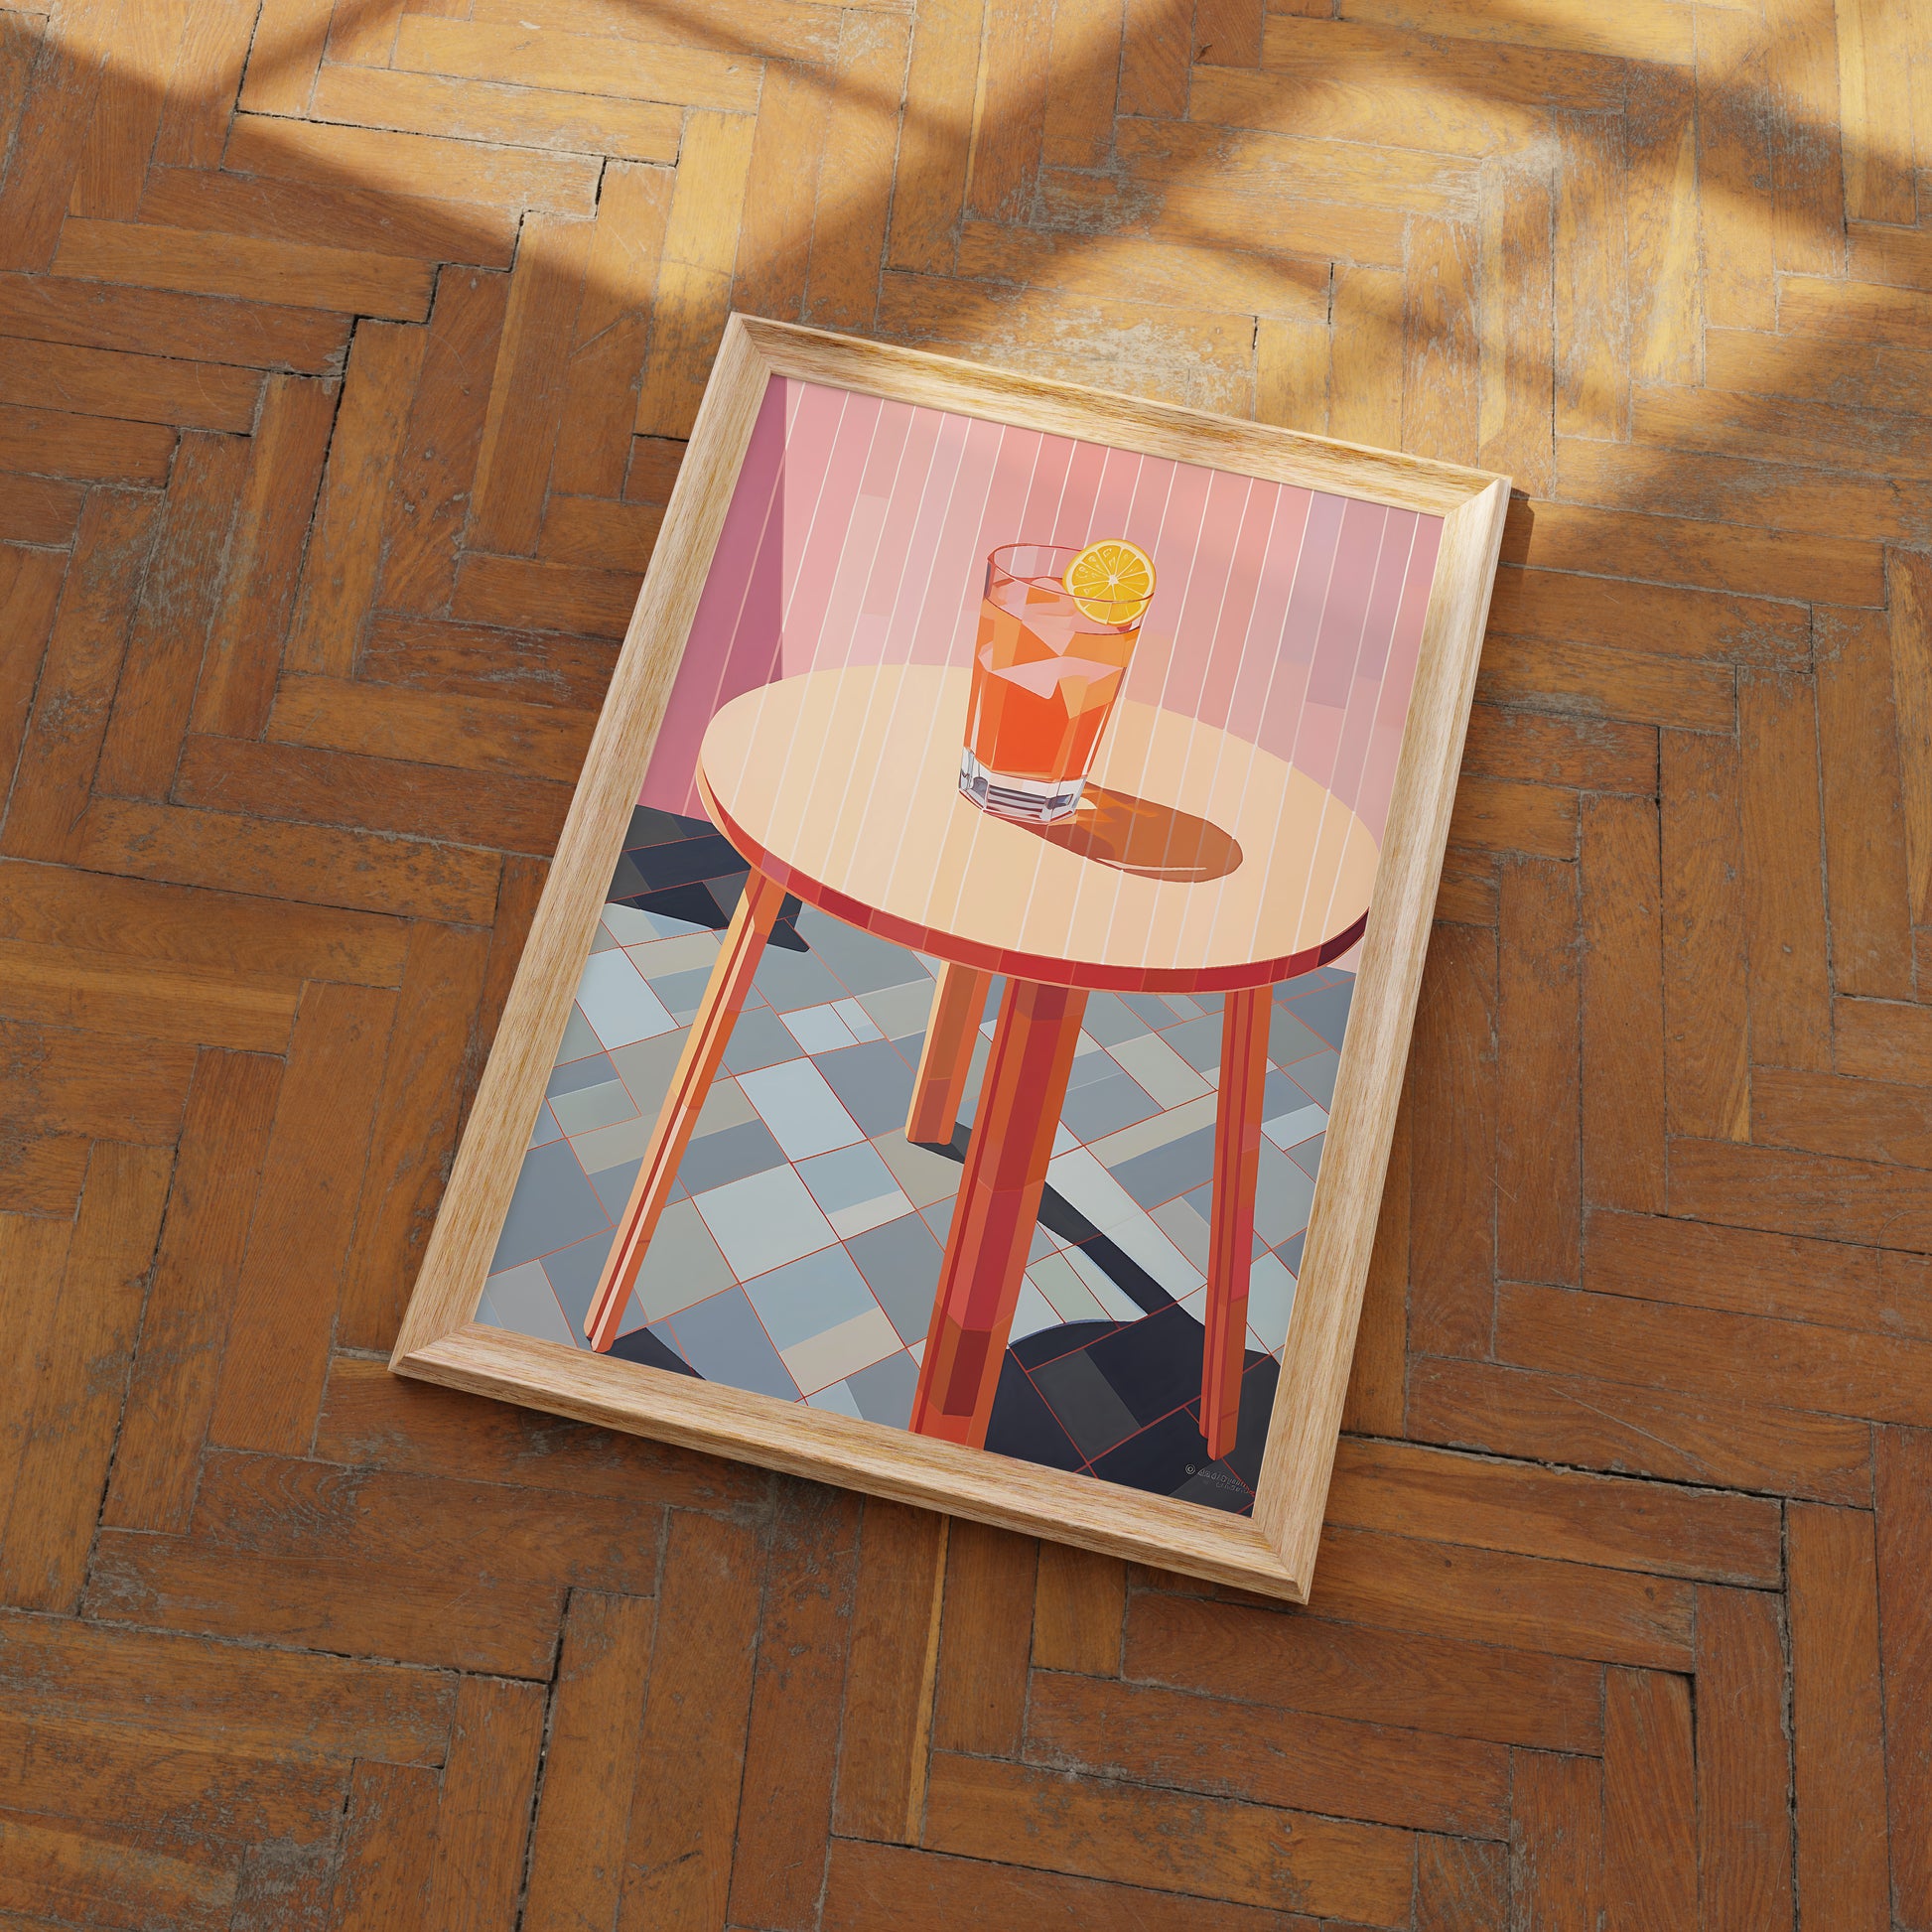 An illustrated poster of a drink on a table placed on a wooden floor.